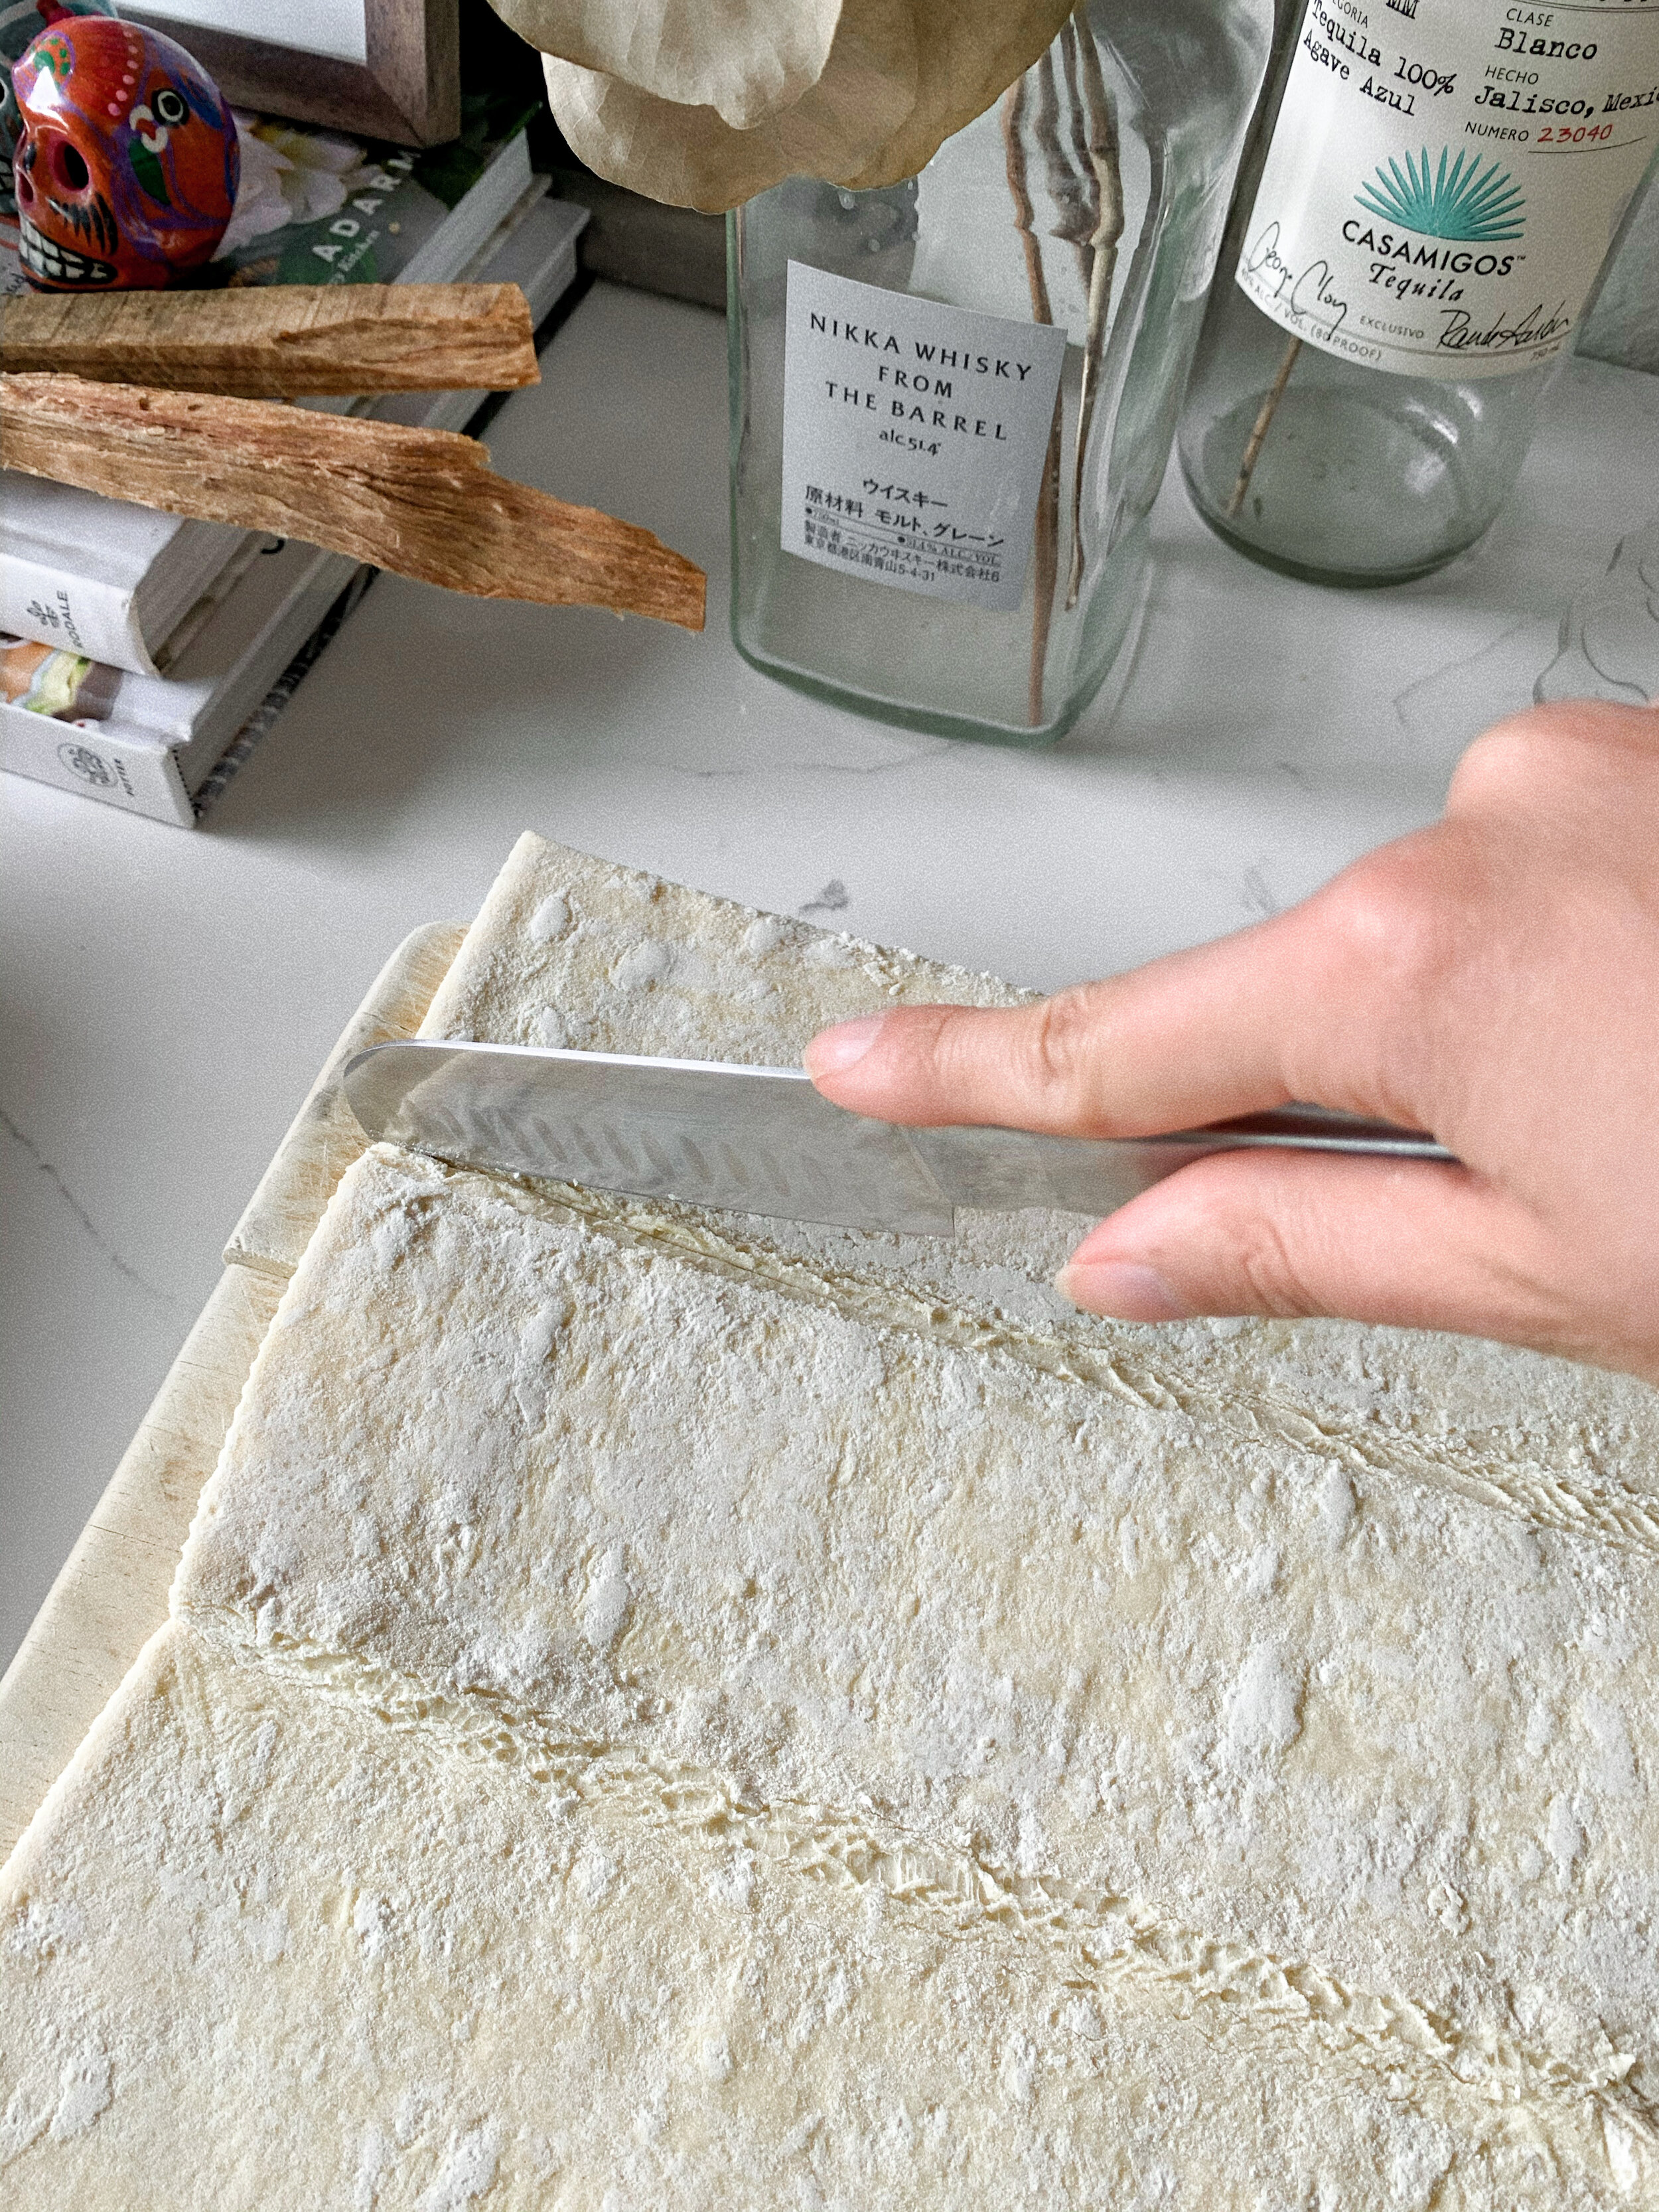 Cutting the puff pastry